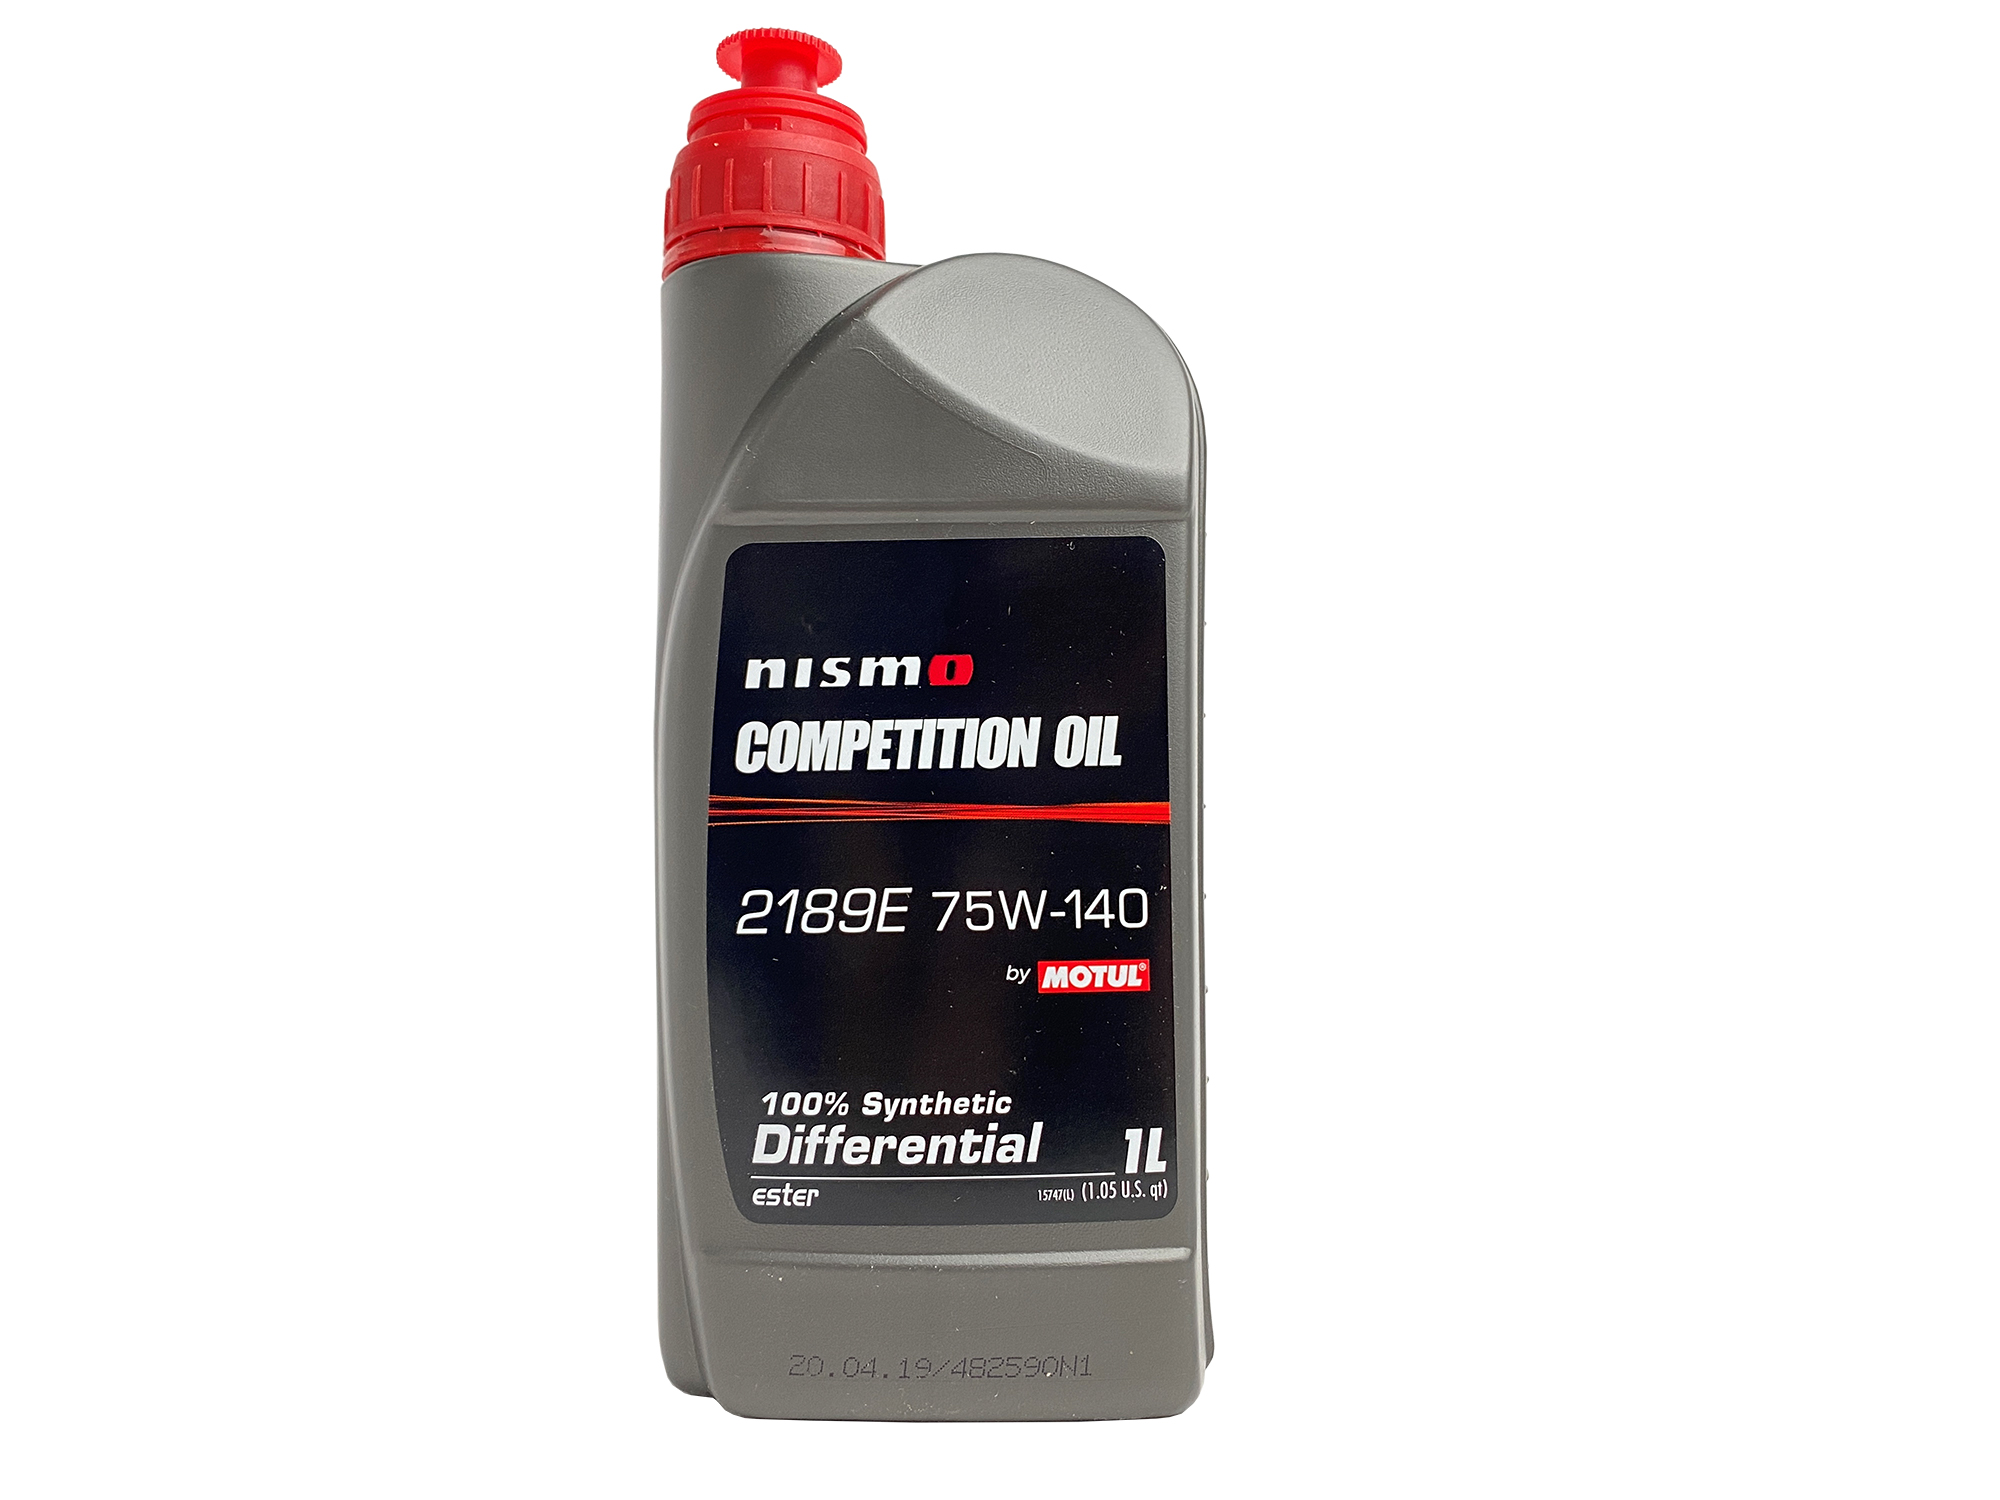 NISMO Competition Differential Gear Oil 75W-140 - 1 Liter